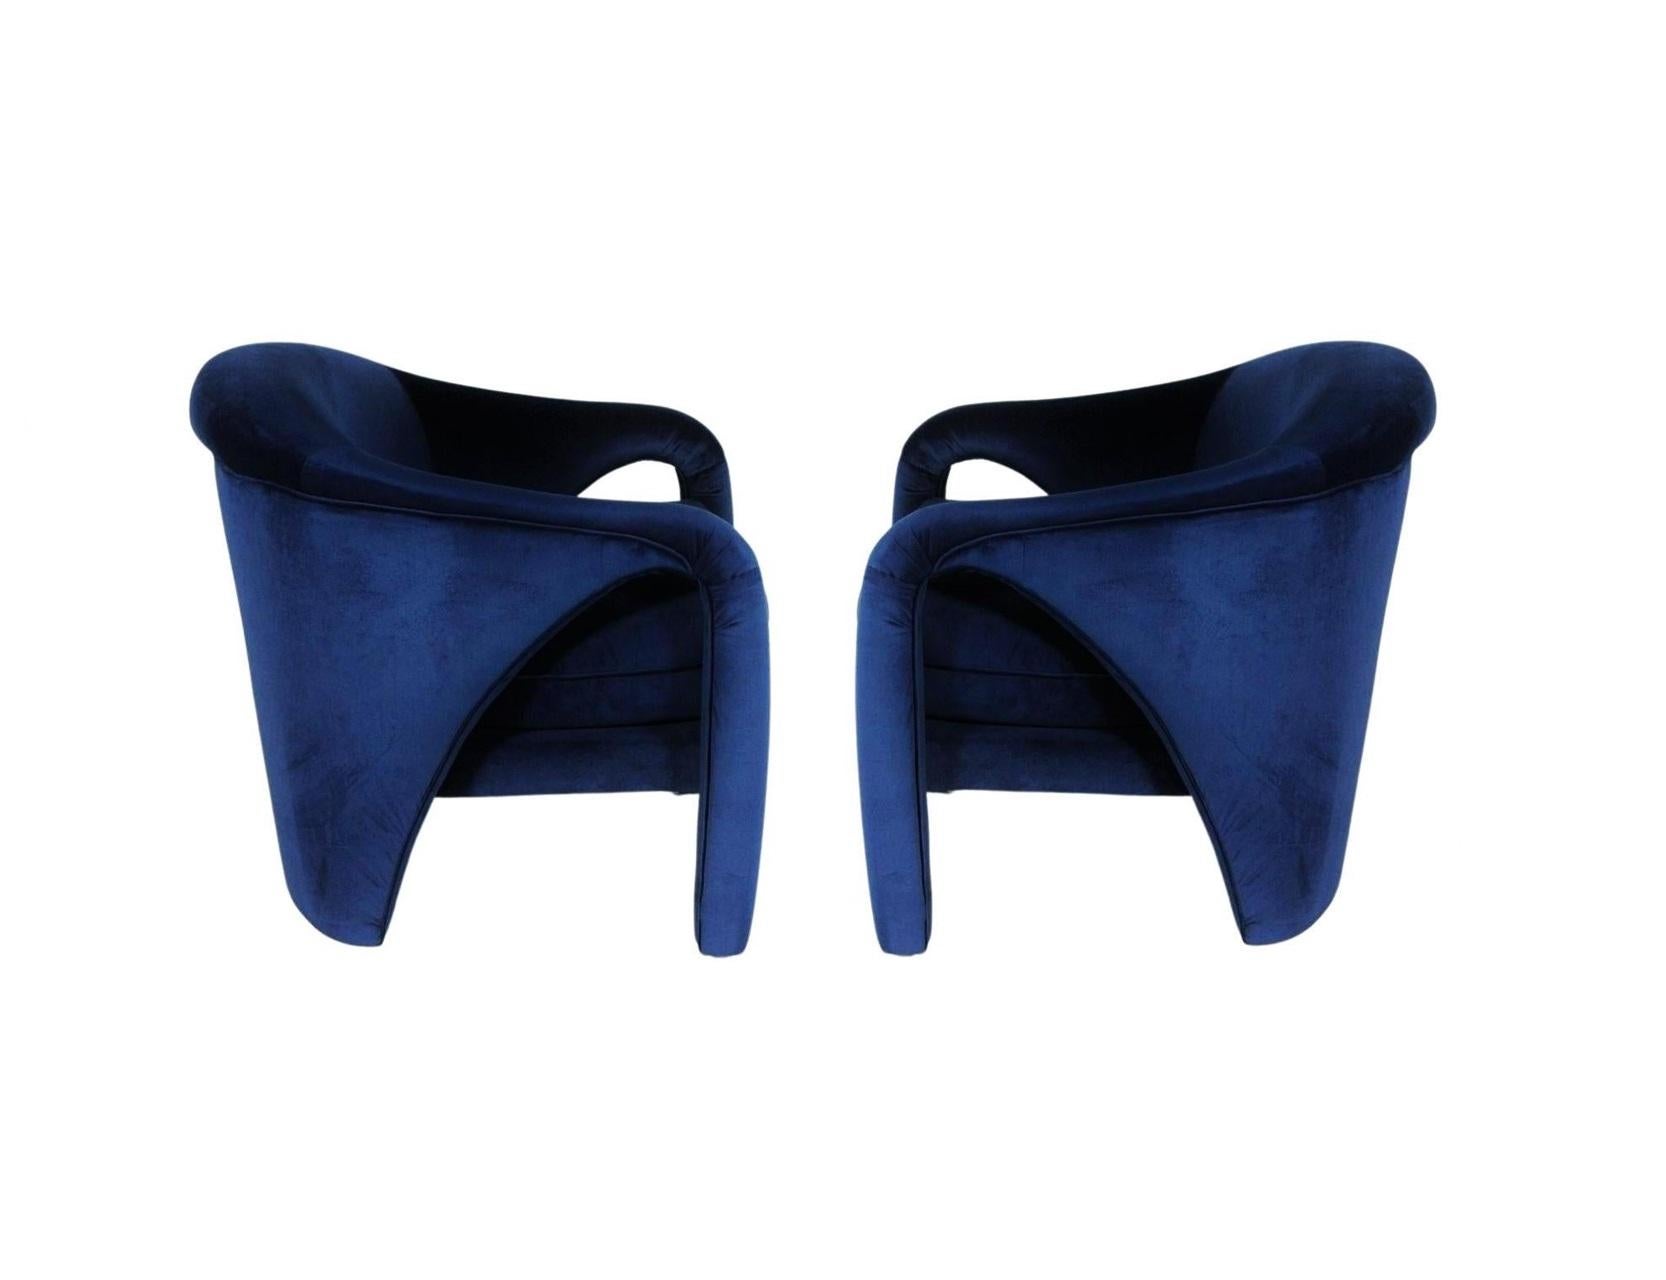 Velvet Vladimir Kaganesque Navy Blue Lounge Chairs by Weiman For Sale